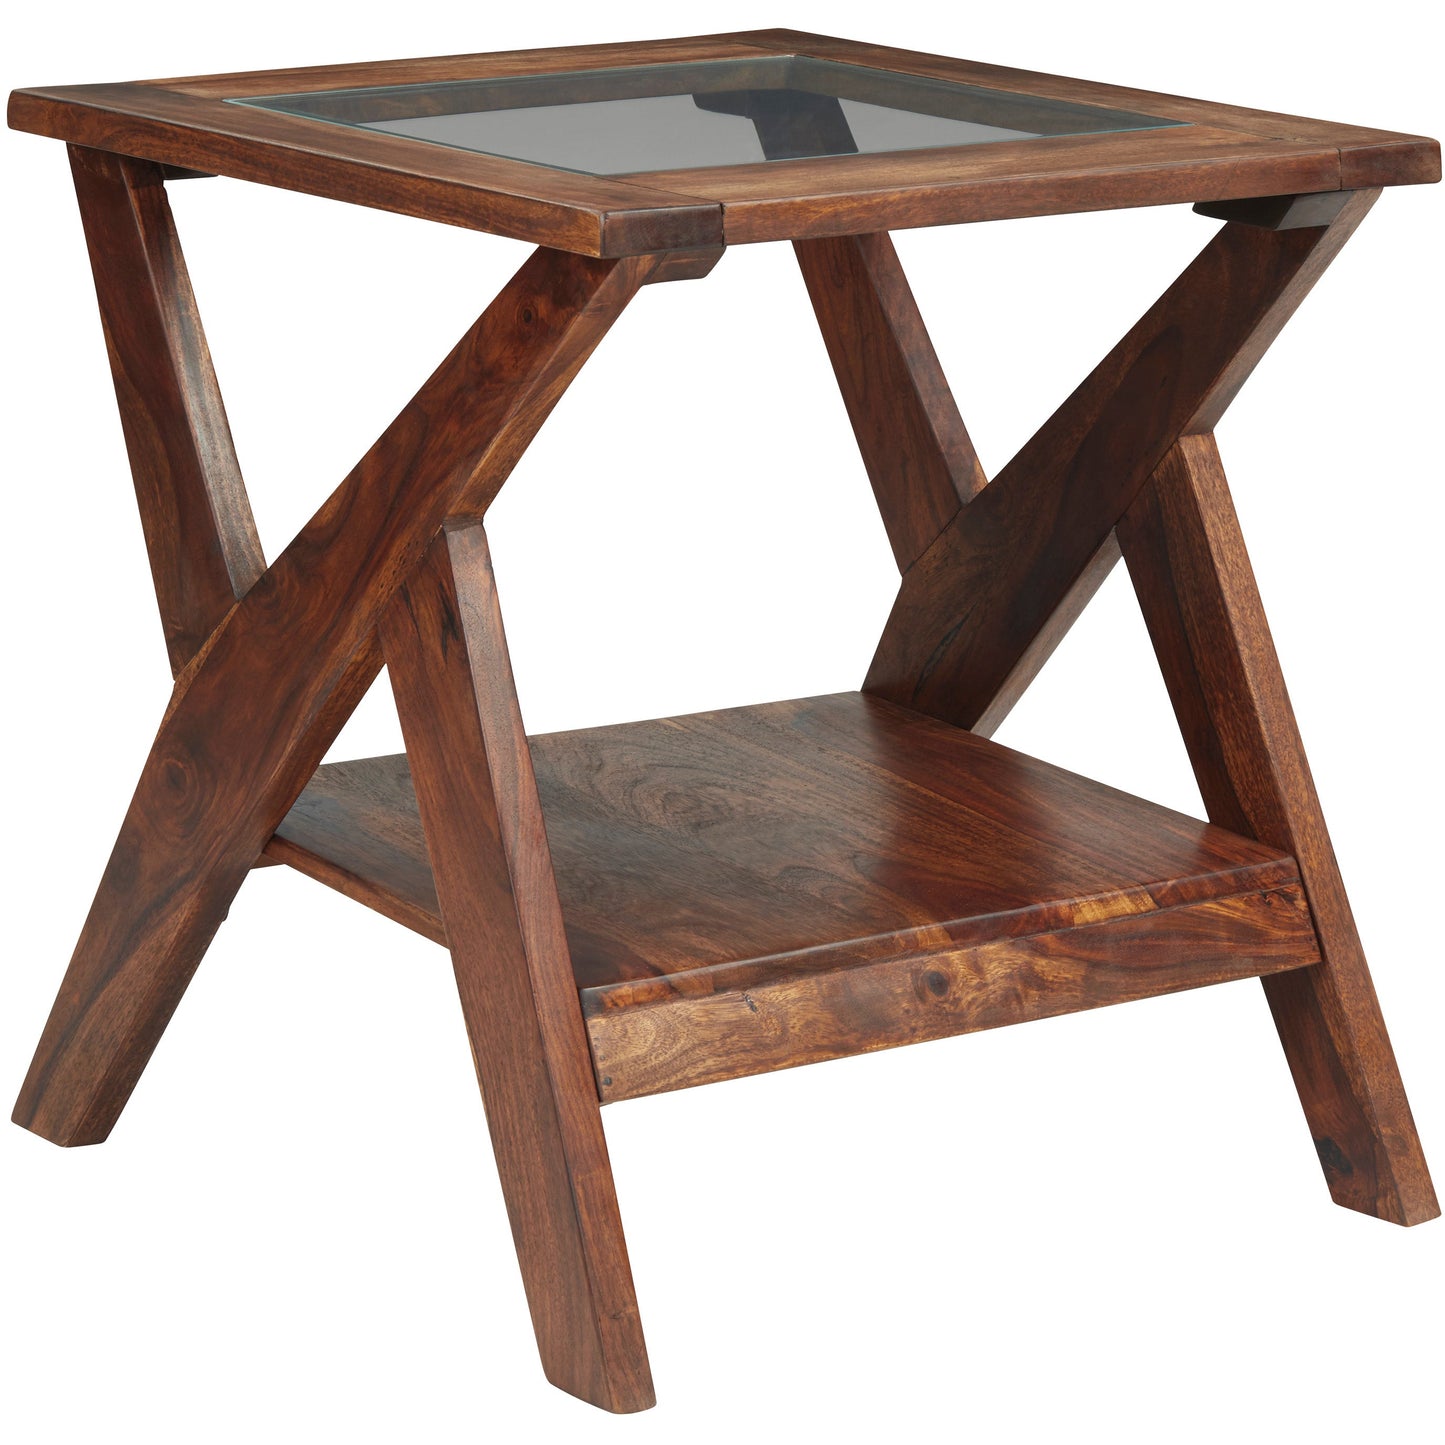 CHARZINE END TABLE - WARM BROWN (Floor Model)